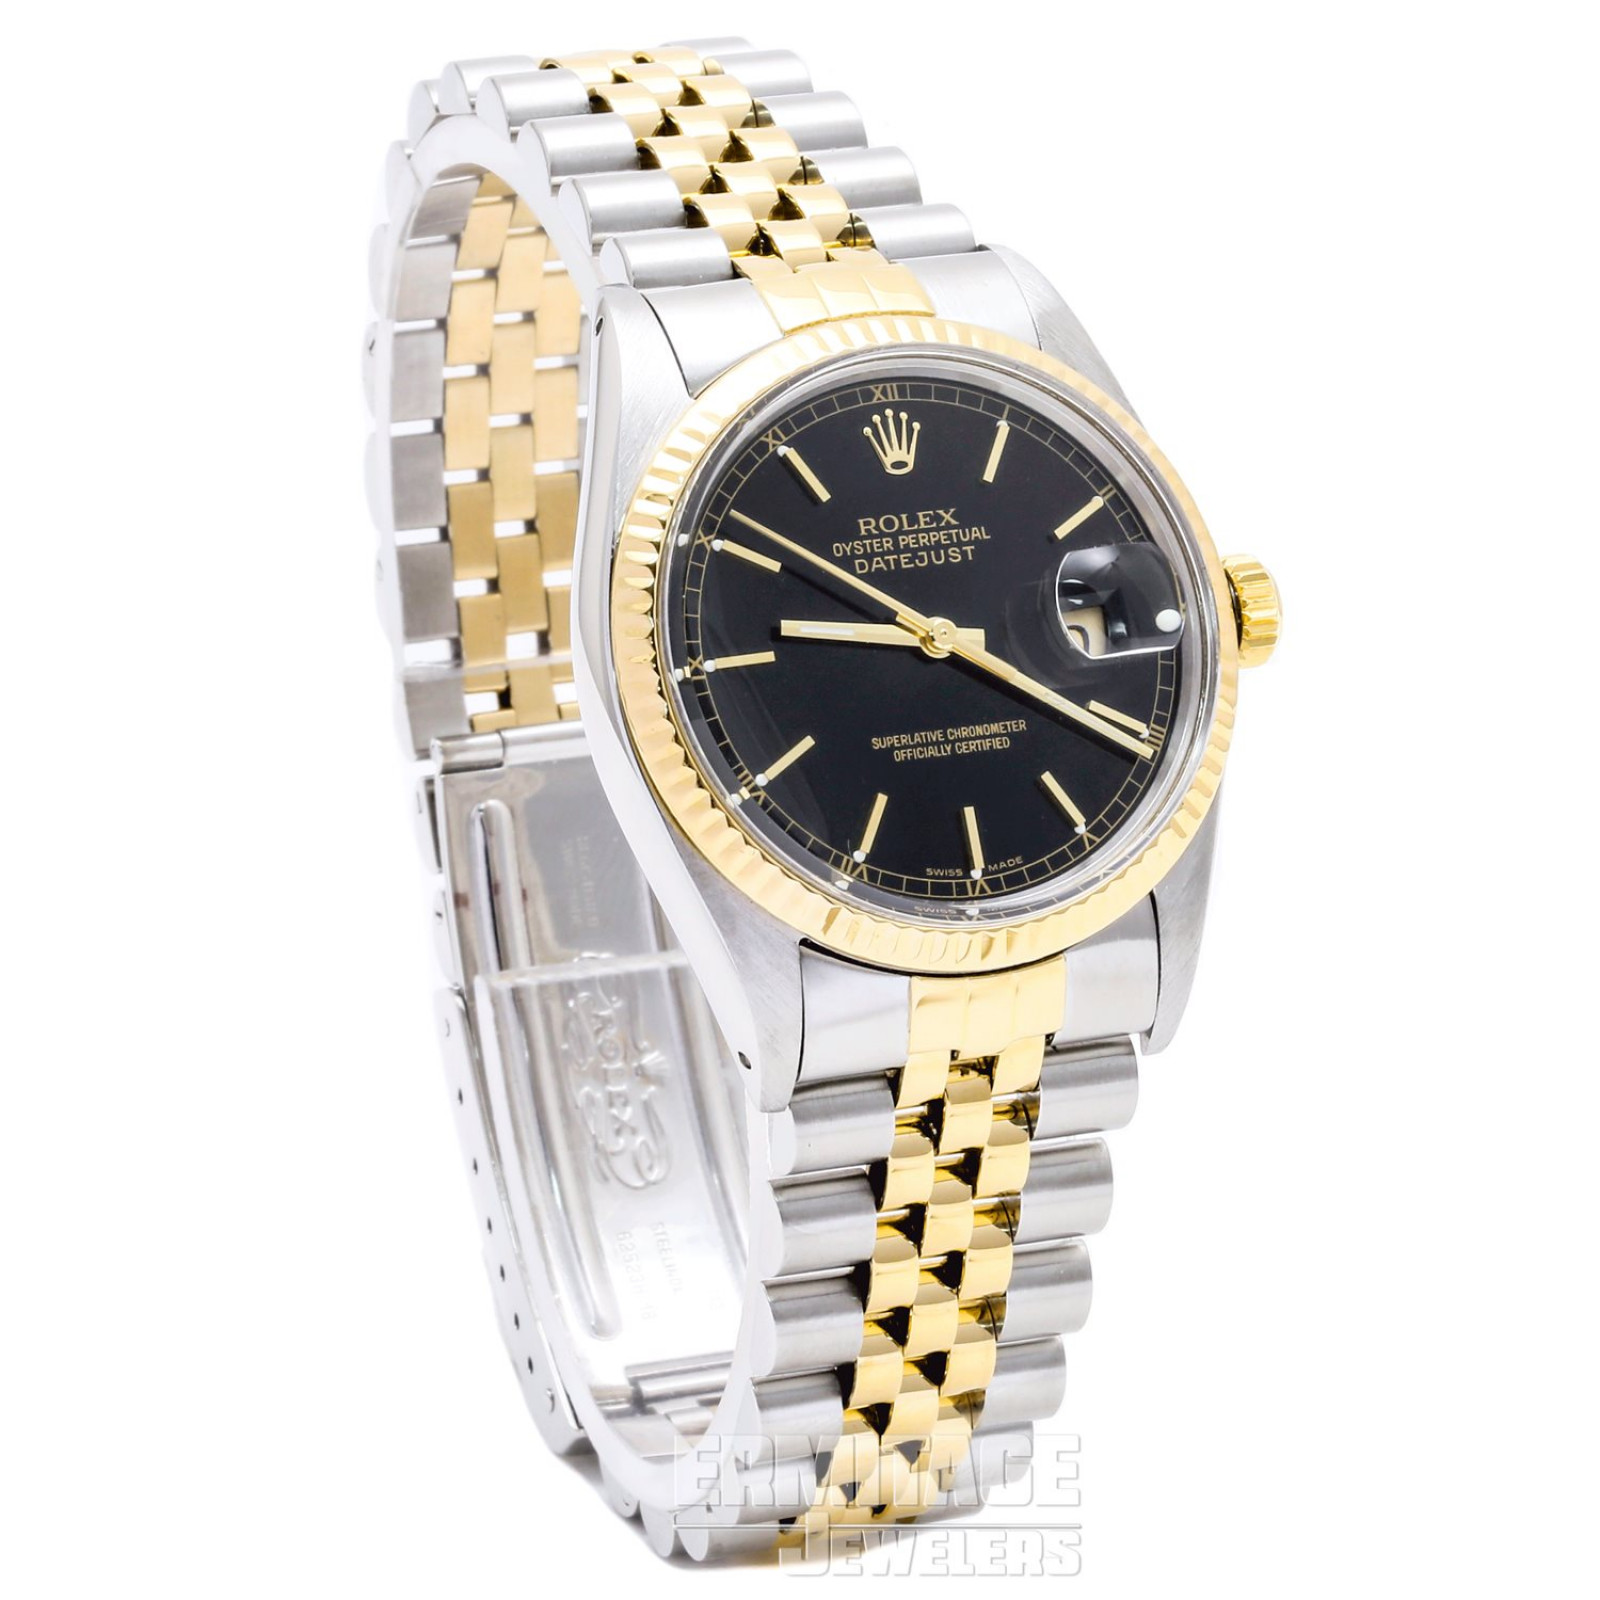 Rolex Datejust 16013 with Black Dial